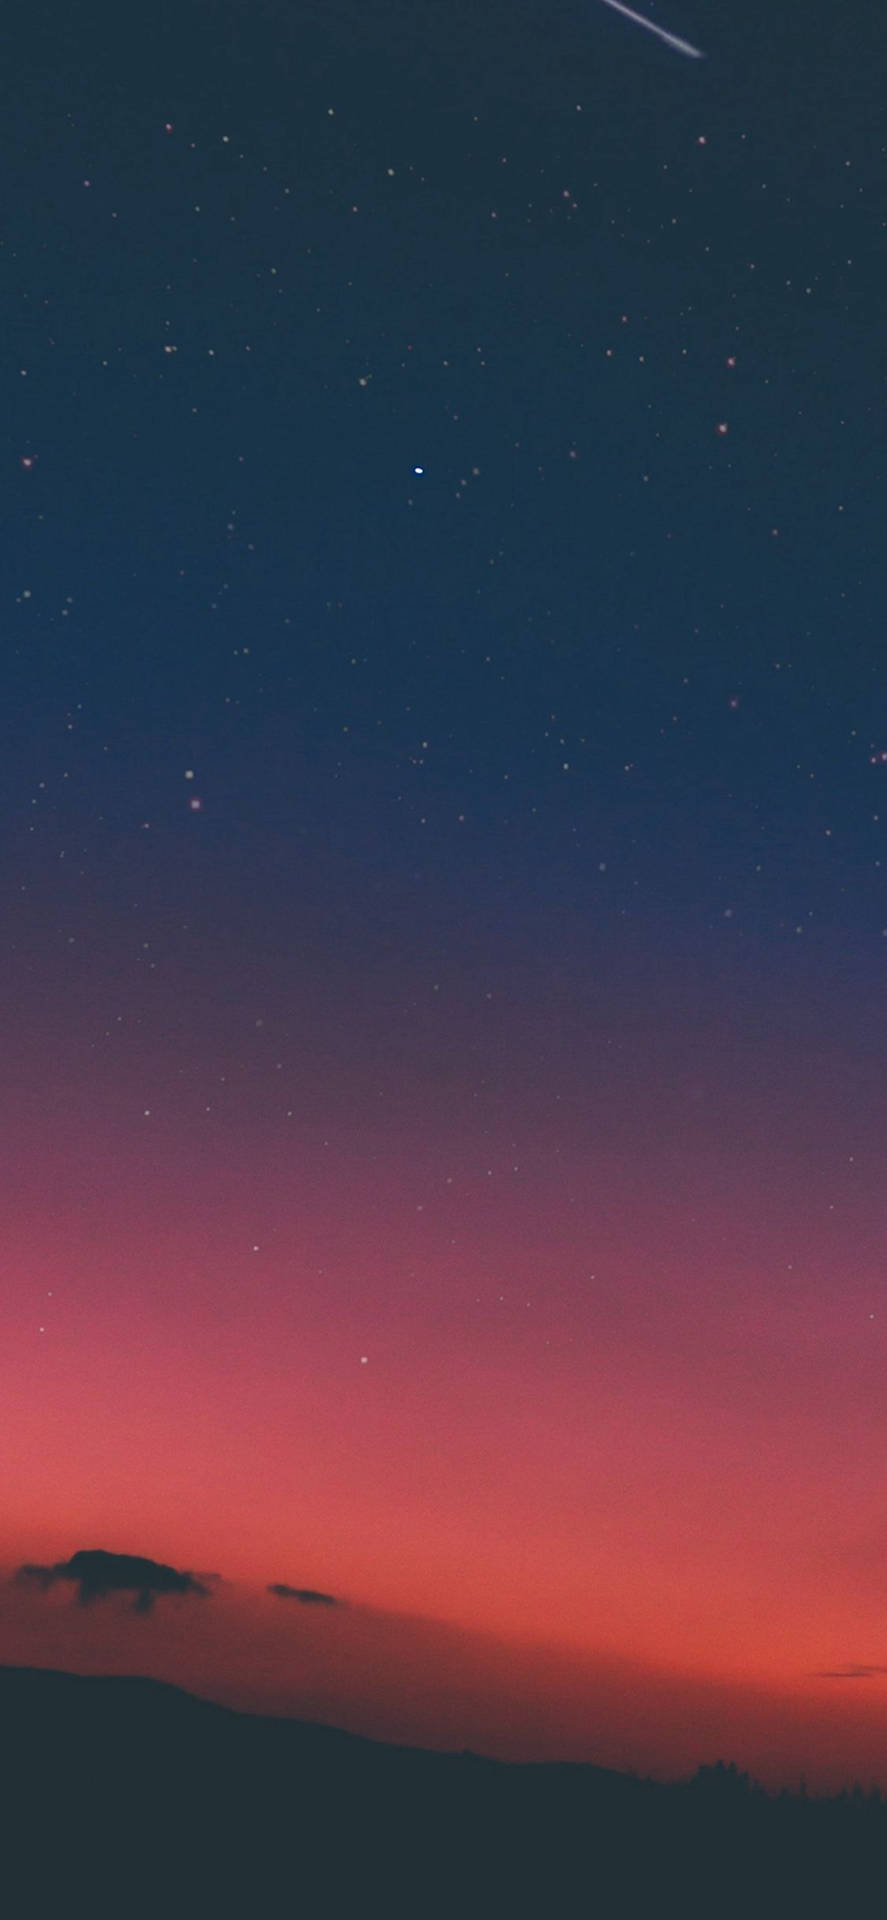 A Pink And Purple Sky With A Comet In The Sky Background